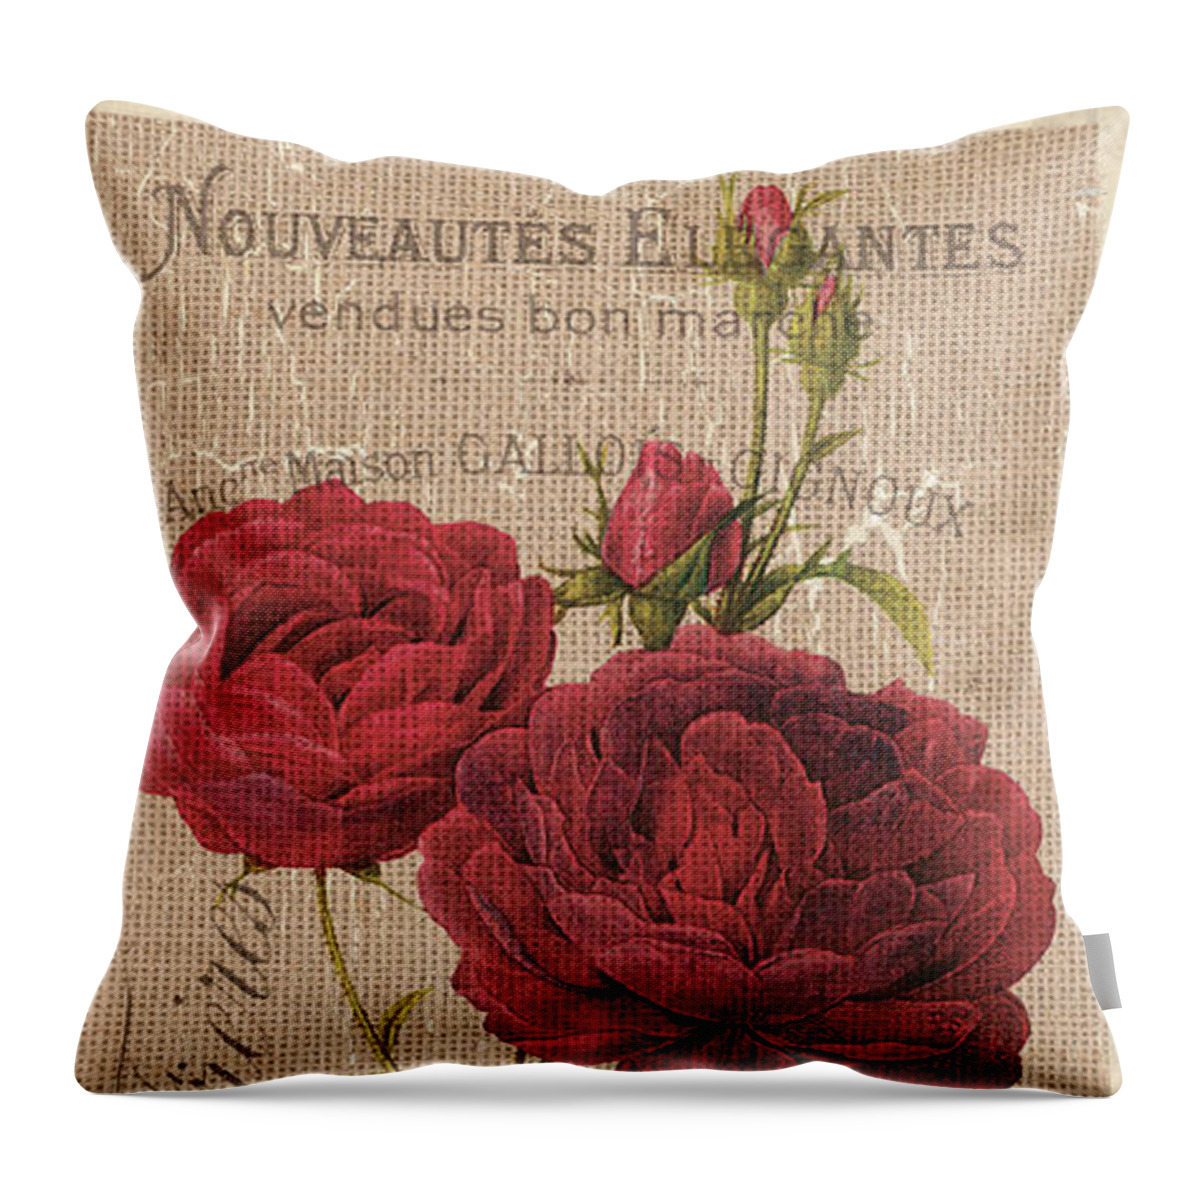 Floral Throw Pillow featuring the painting Vintage Burlap Floral 3 by Debbie DeWitt